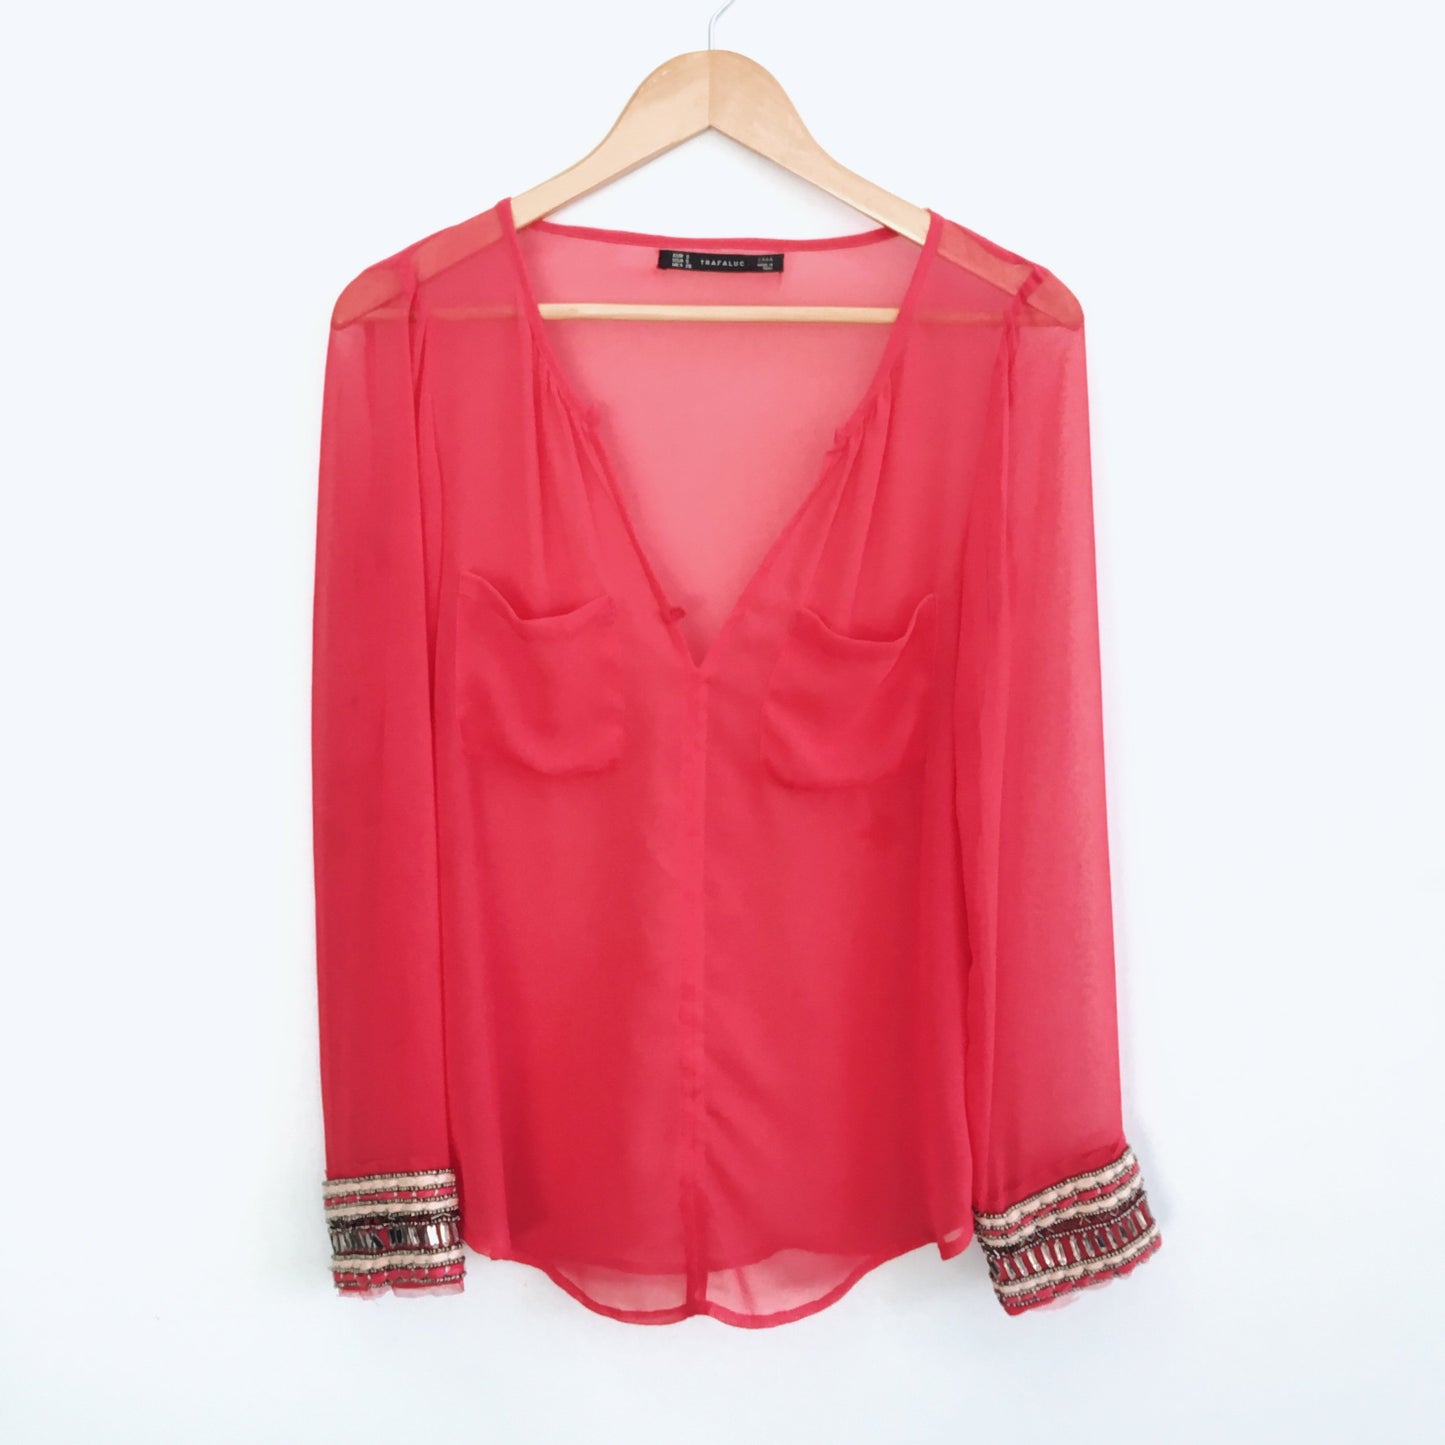 Zara Blouse with Beaded Cuffs - size Small